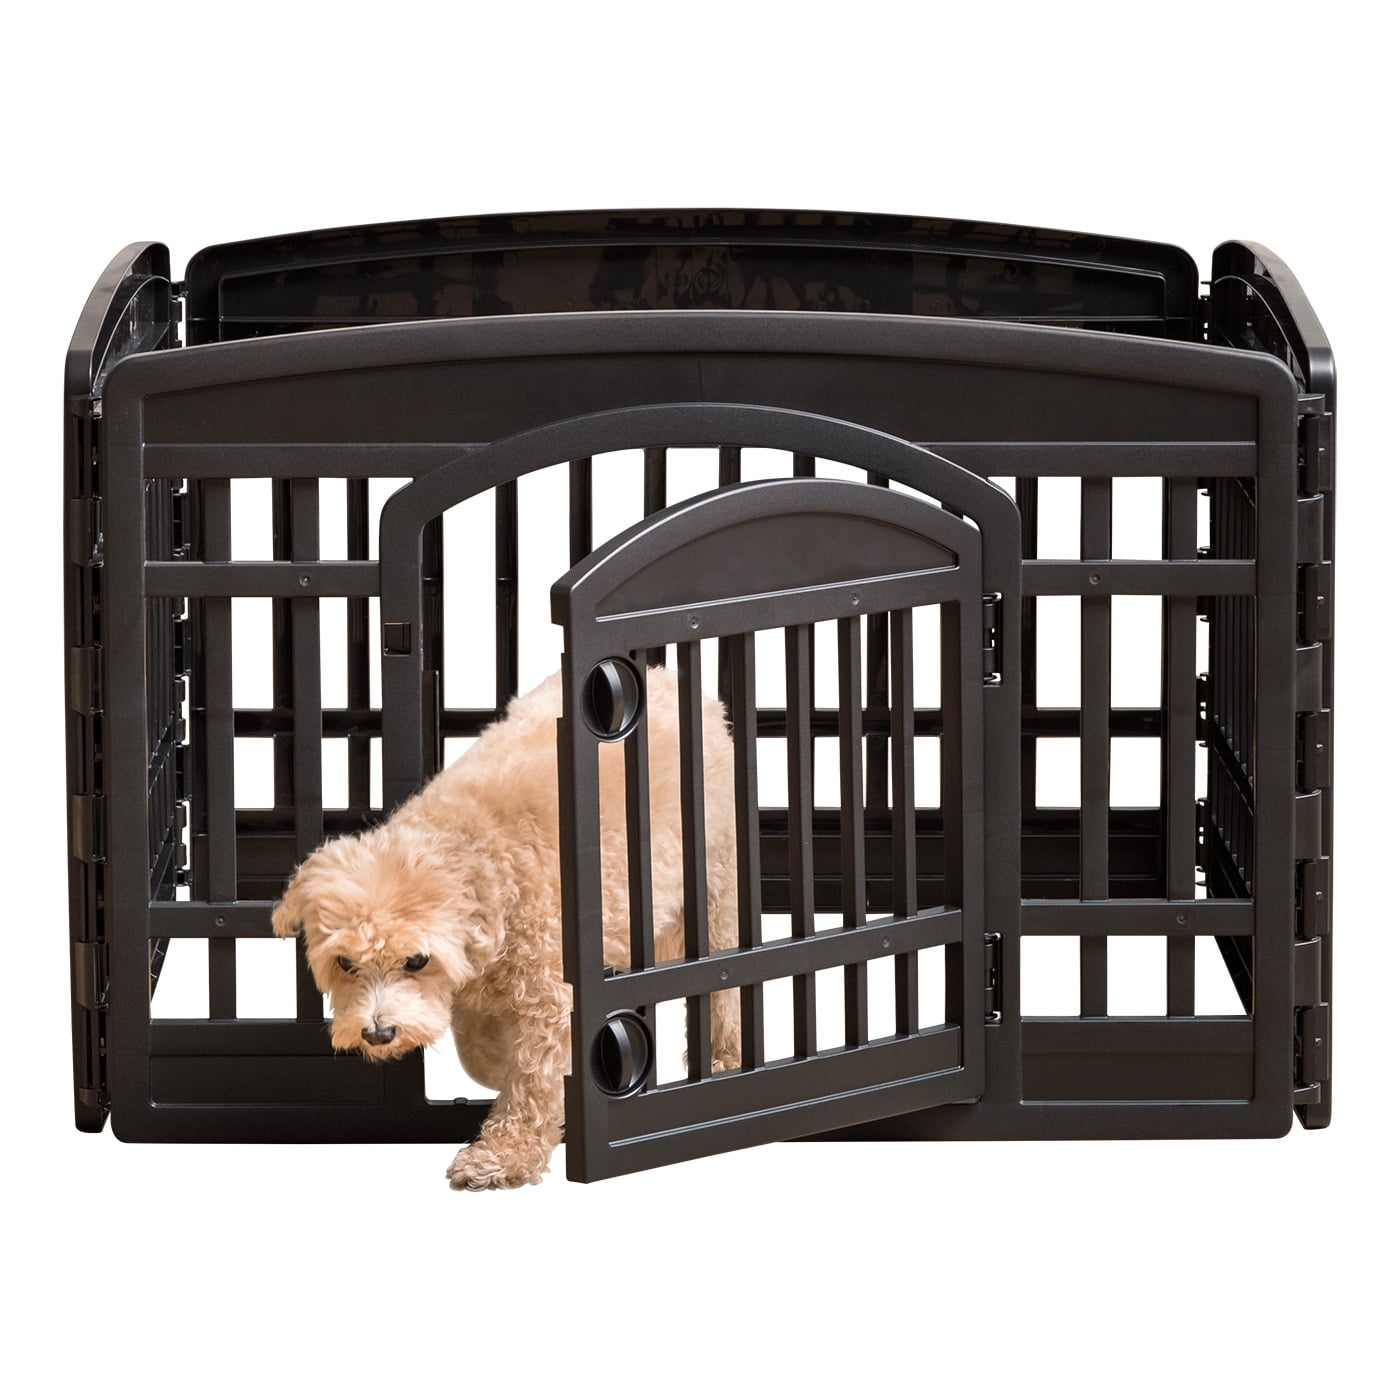 IRIS Large Indoor Outdoor Dog Pet Playpen Exercise Pen Play Yard Cage Fence 